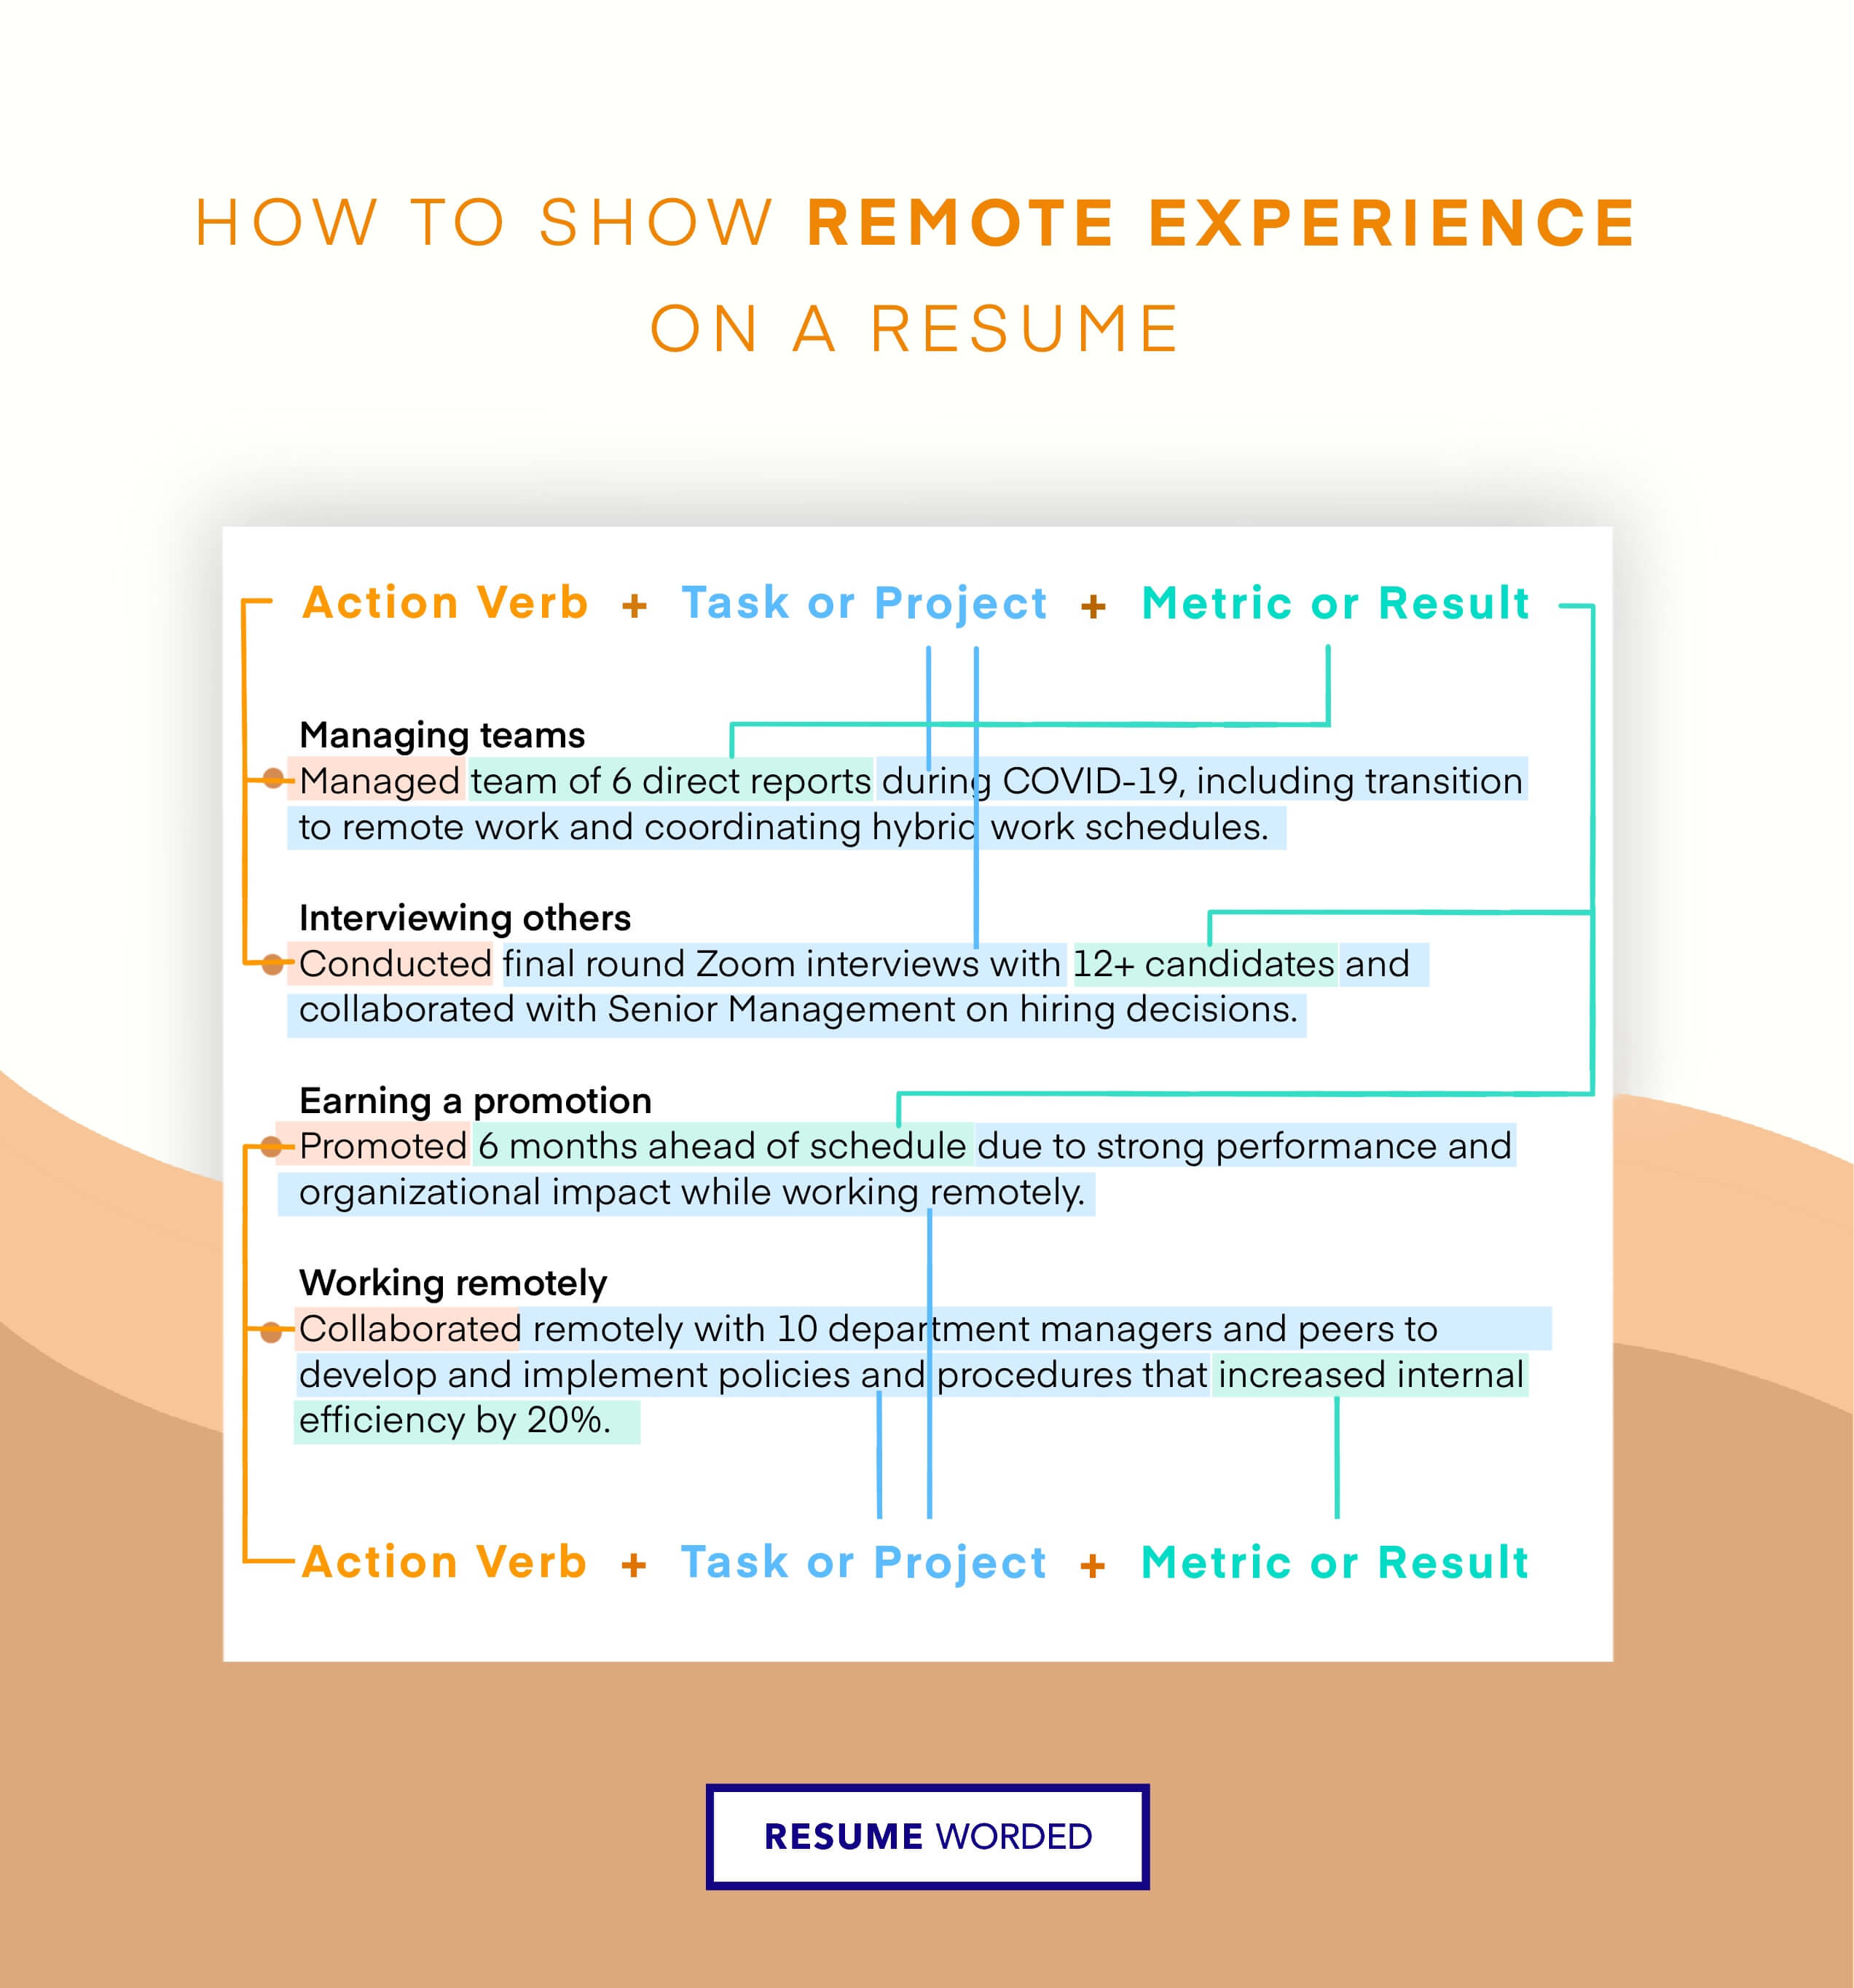 Showcase experience with remote or international hiring - Recruiter CV